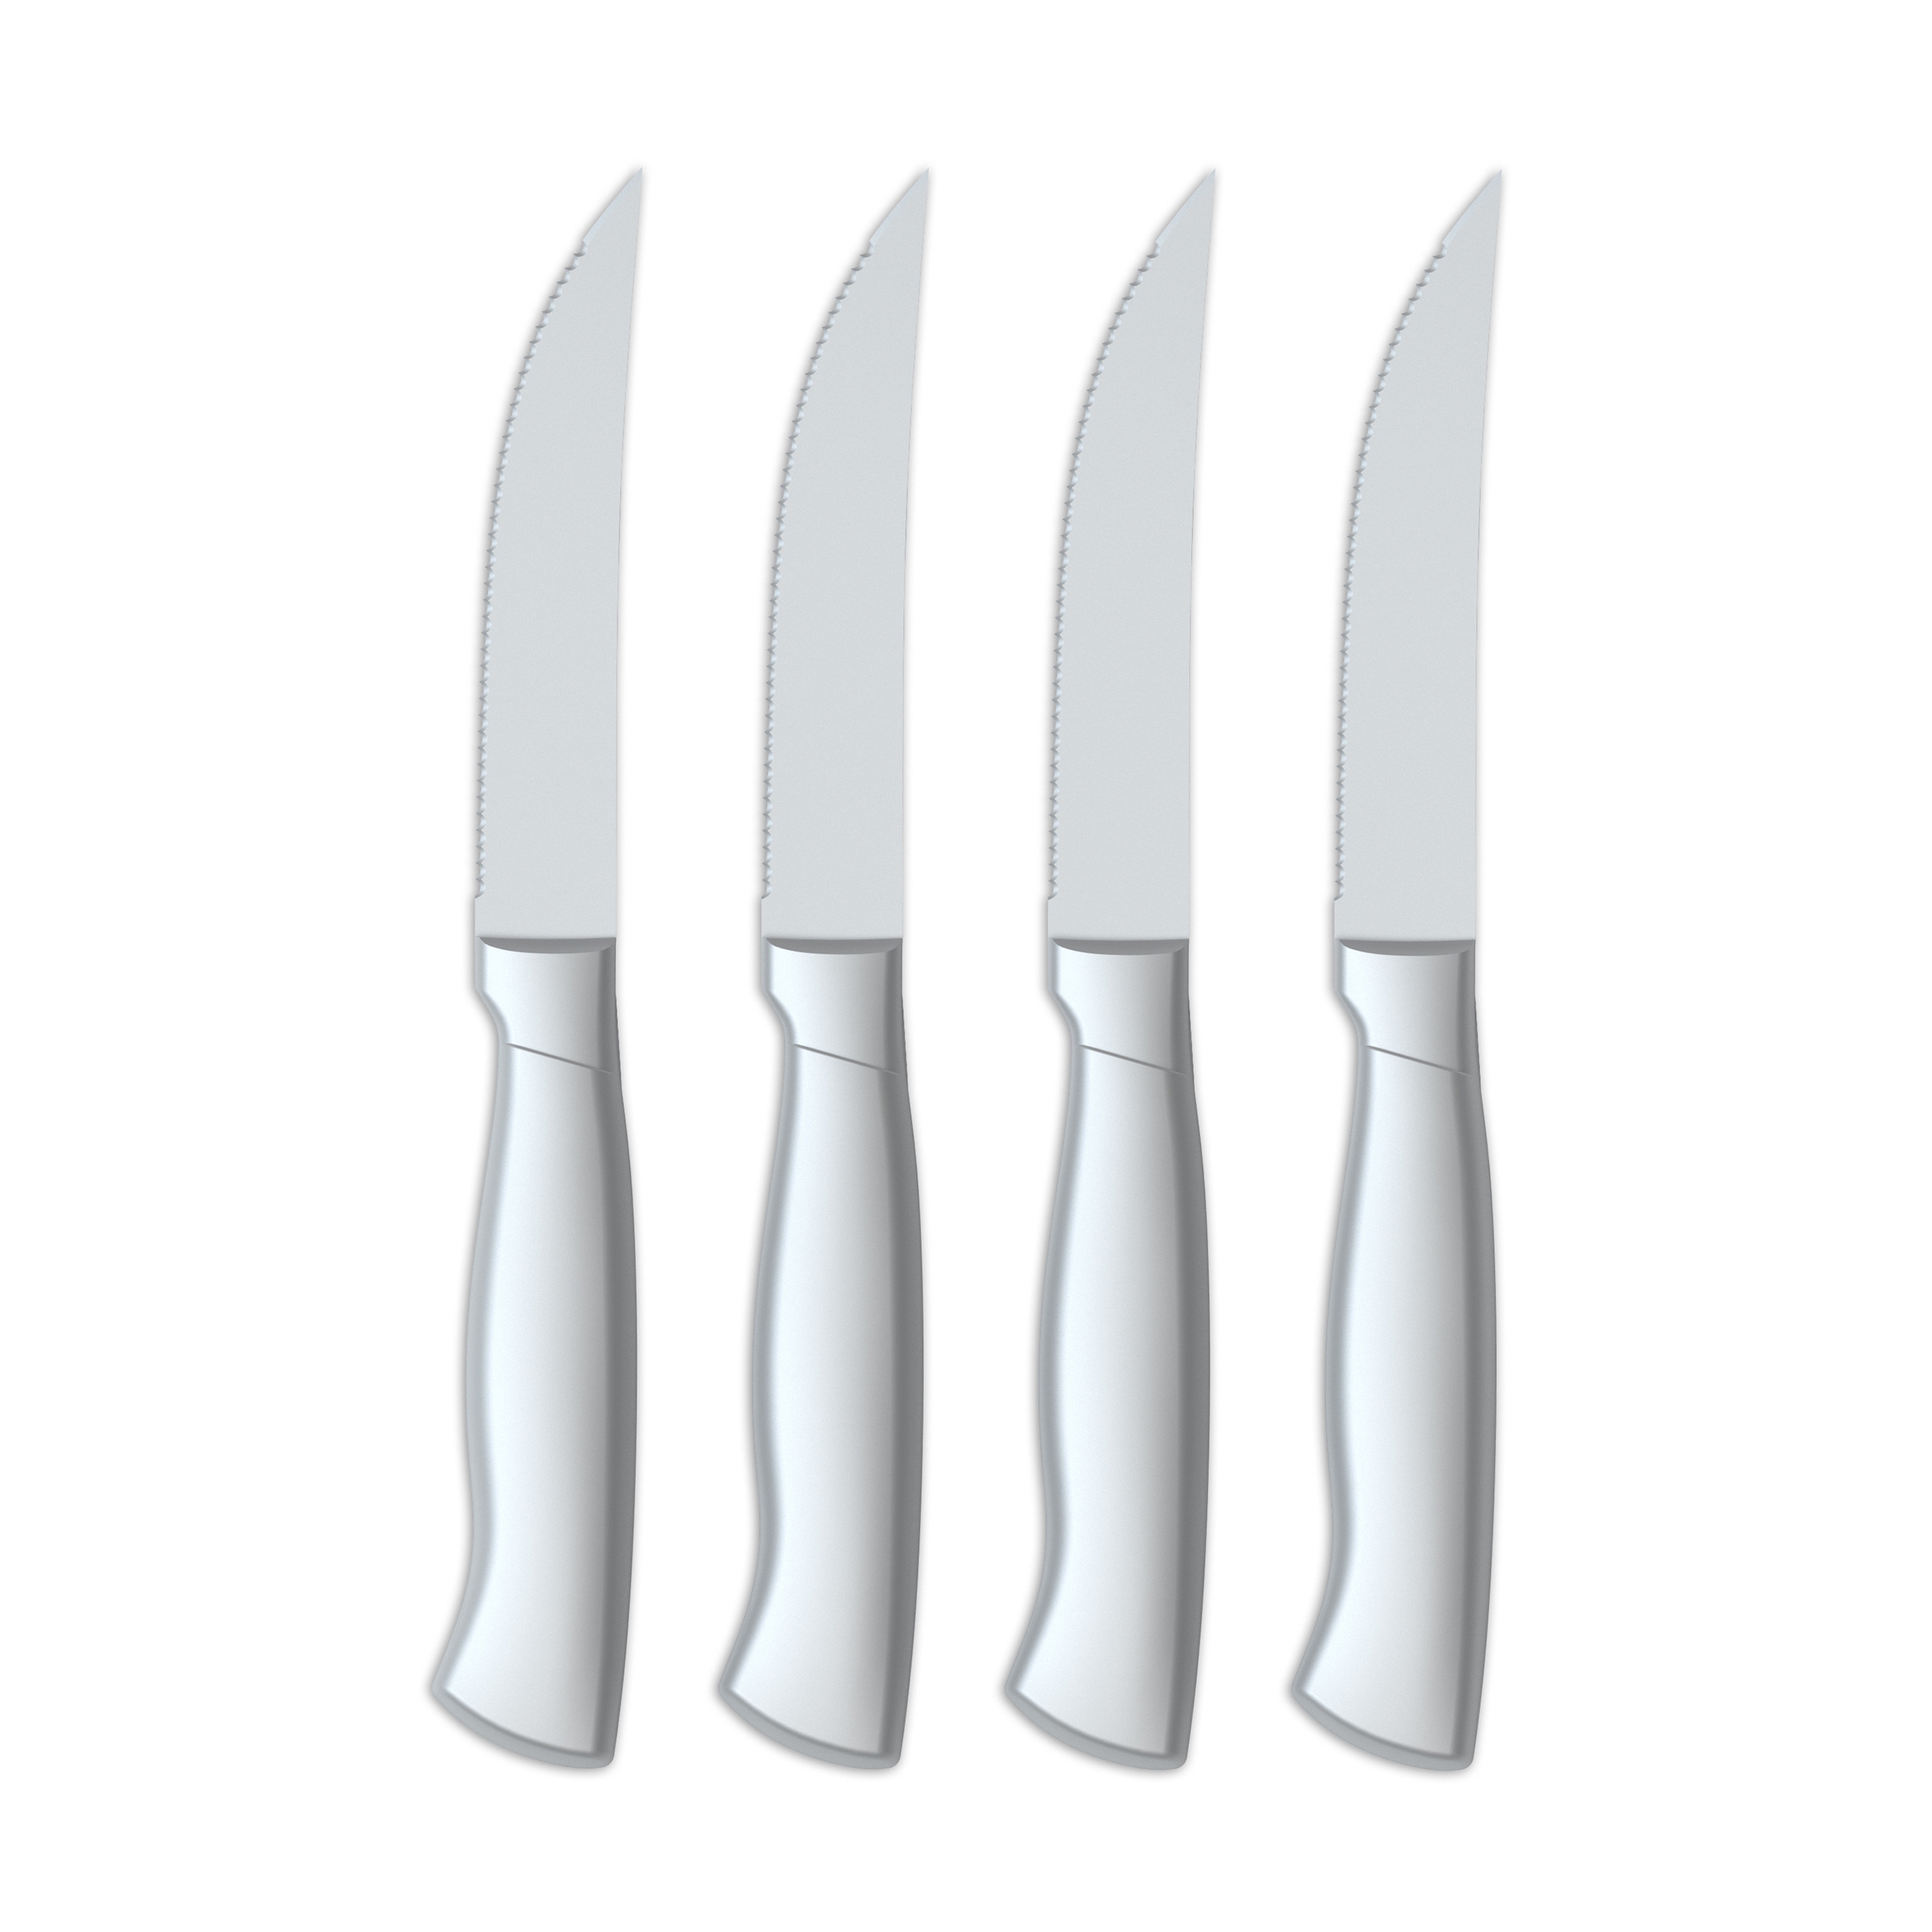 4pc Stainless Steel Hollow Handle Steak Knife Set